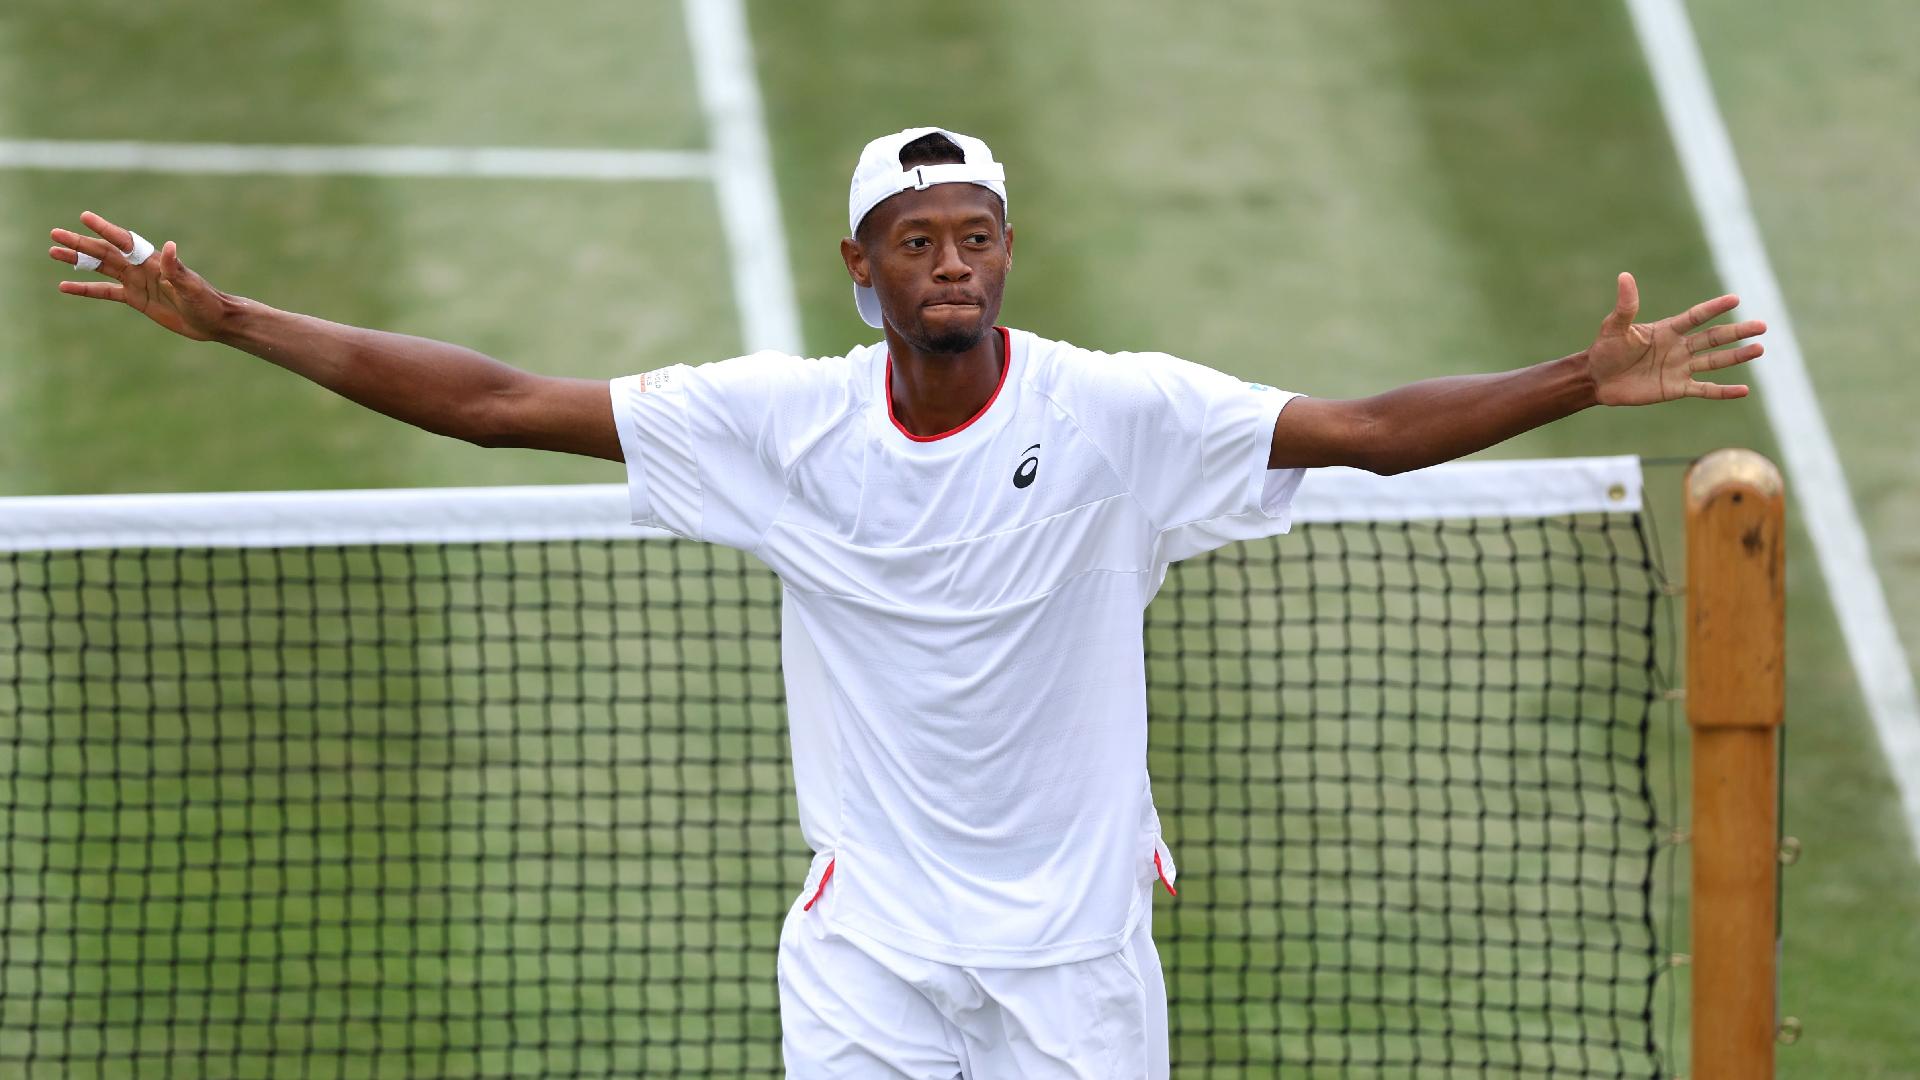 Chris Eubanks living a dream after knocking out Stefanos Tsitsipas beIN SPORTS